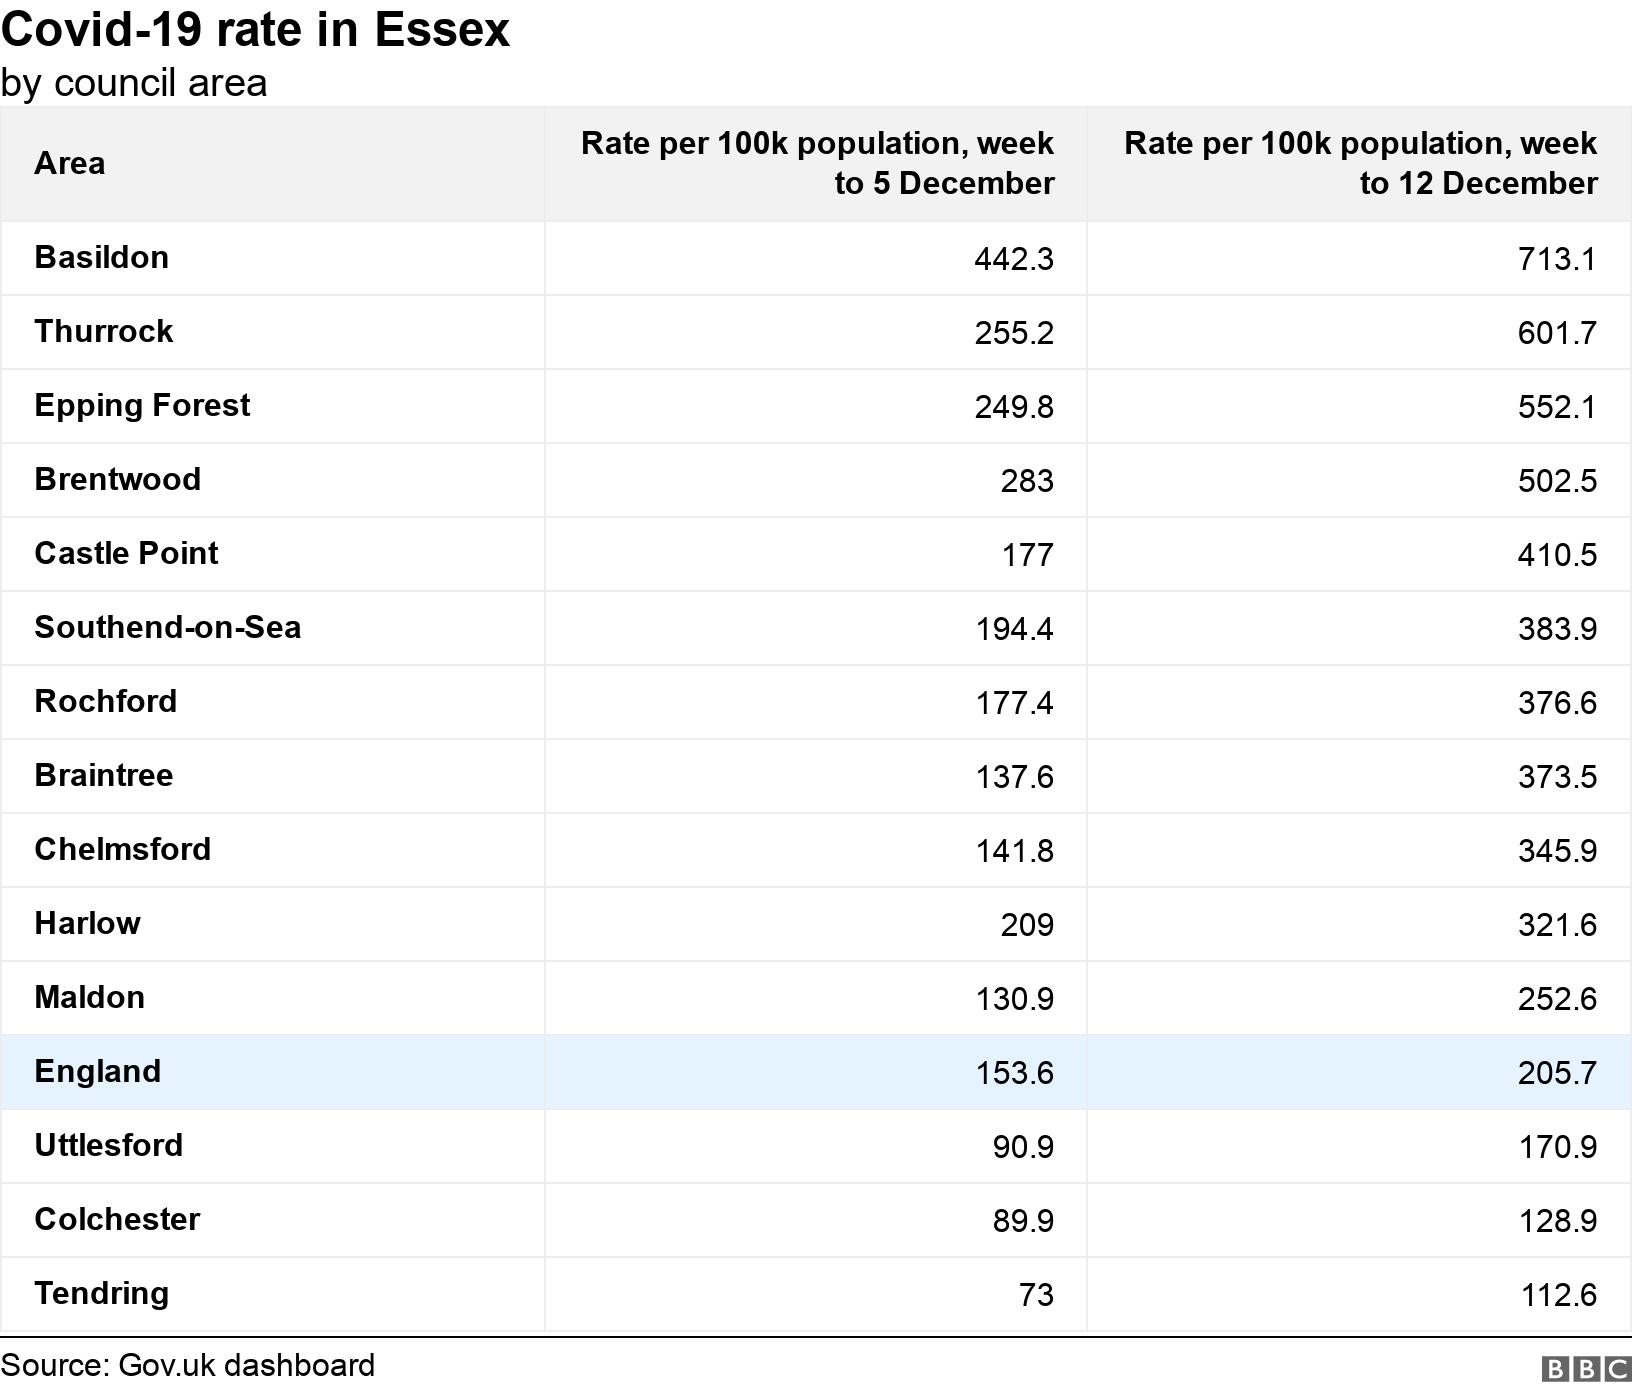 Covid-19 rate in Essex. by council area. .